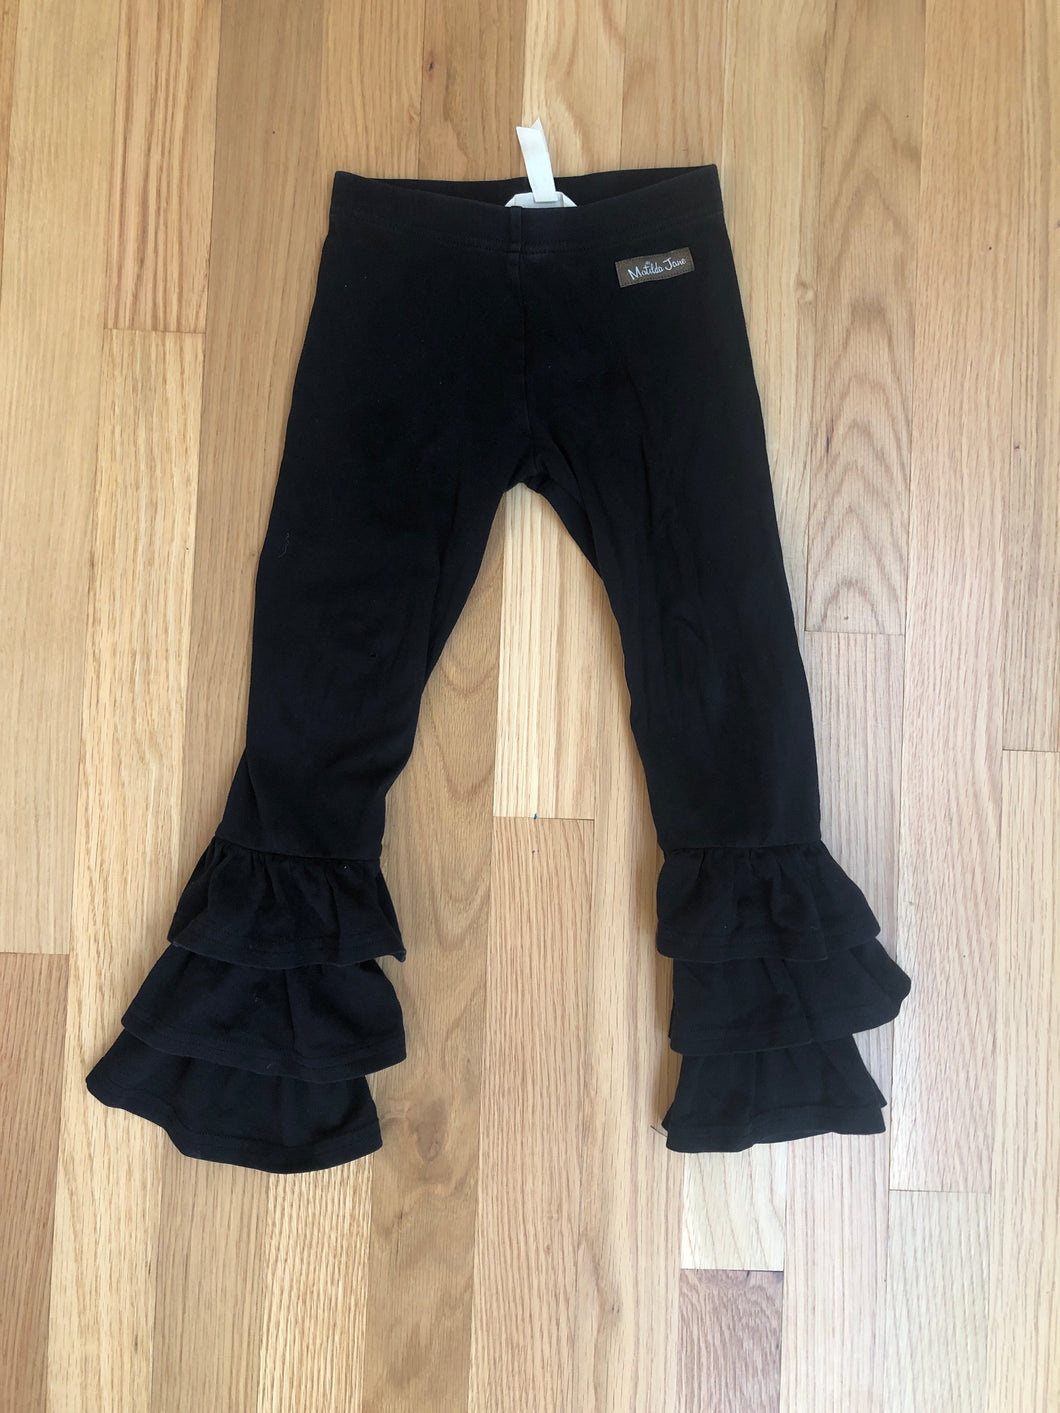 Matilda Jane girls ruffle pants size 4- good condition. Has one small hole on the right knee 4